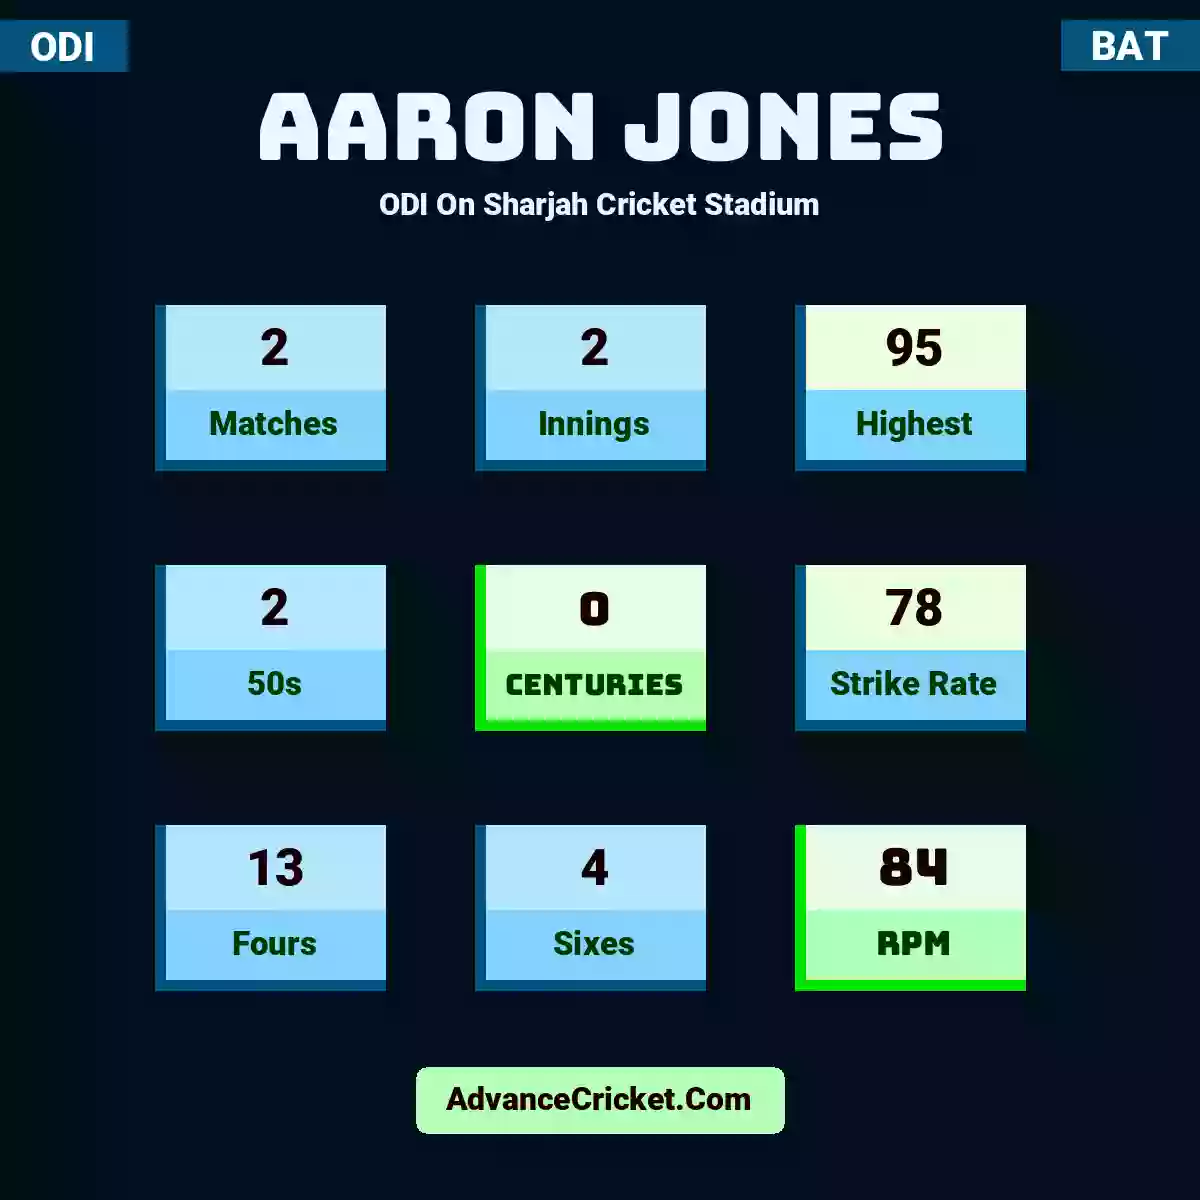 Aaron Jones ODI  On Sharjah Cricket Stadium, Aaron Jones played 2 matches, scored 95 runs as highest, 2 half-centuries, and 0 centuries, with a strike rate of 78. A.Jones hit 13 fours and 4 sixes, with an RPM of 84.